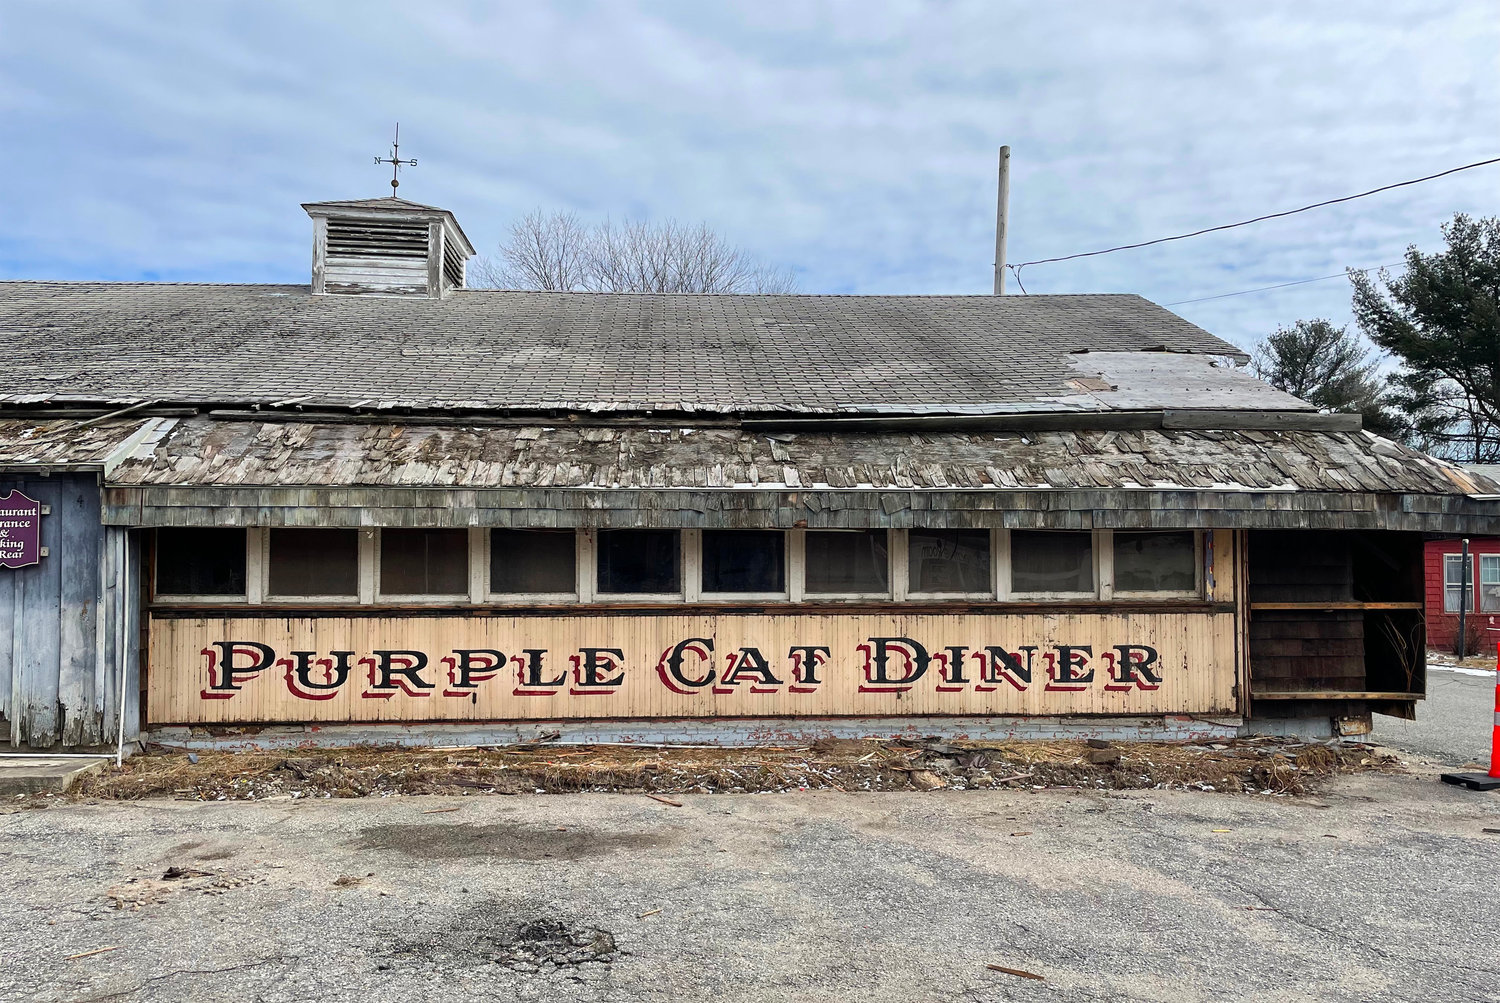 “While demolishing the Purple Cat restaurant in Chepachet, two diner cars built into the structure were exhumed. One was intact enough to be moved offsite to be restored into an Ice Cream parlor.”